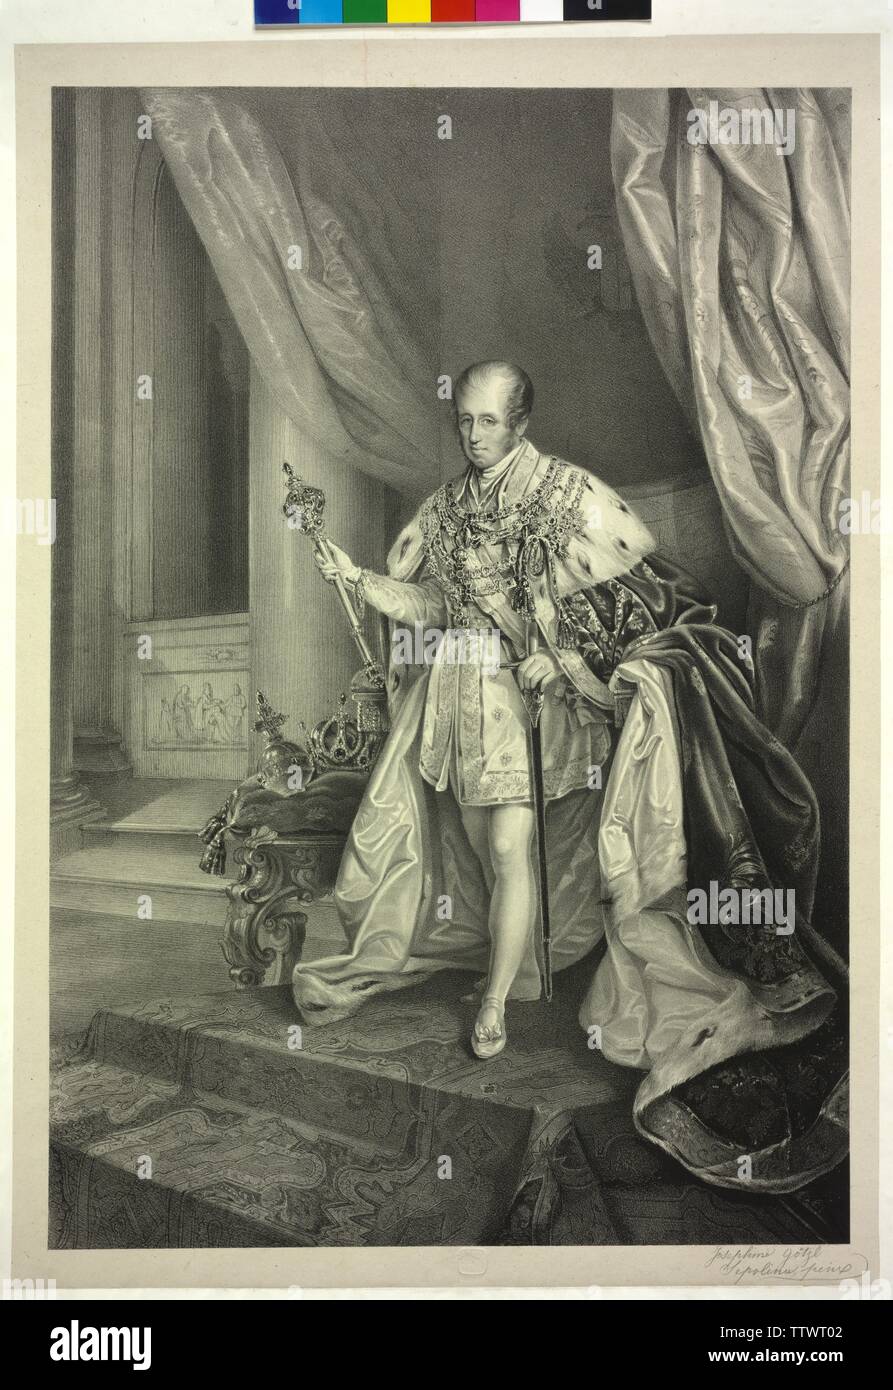 Ferdinand I, Emperor of Austria, picture in the coronation robes as Emperor of Austria, lithograph based on a painting by Josephine Goetzl-Sepolina. China, Additional-Rights-Clearance-Info-Not-Available Stock Photo